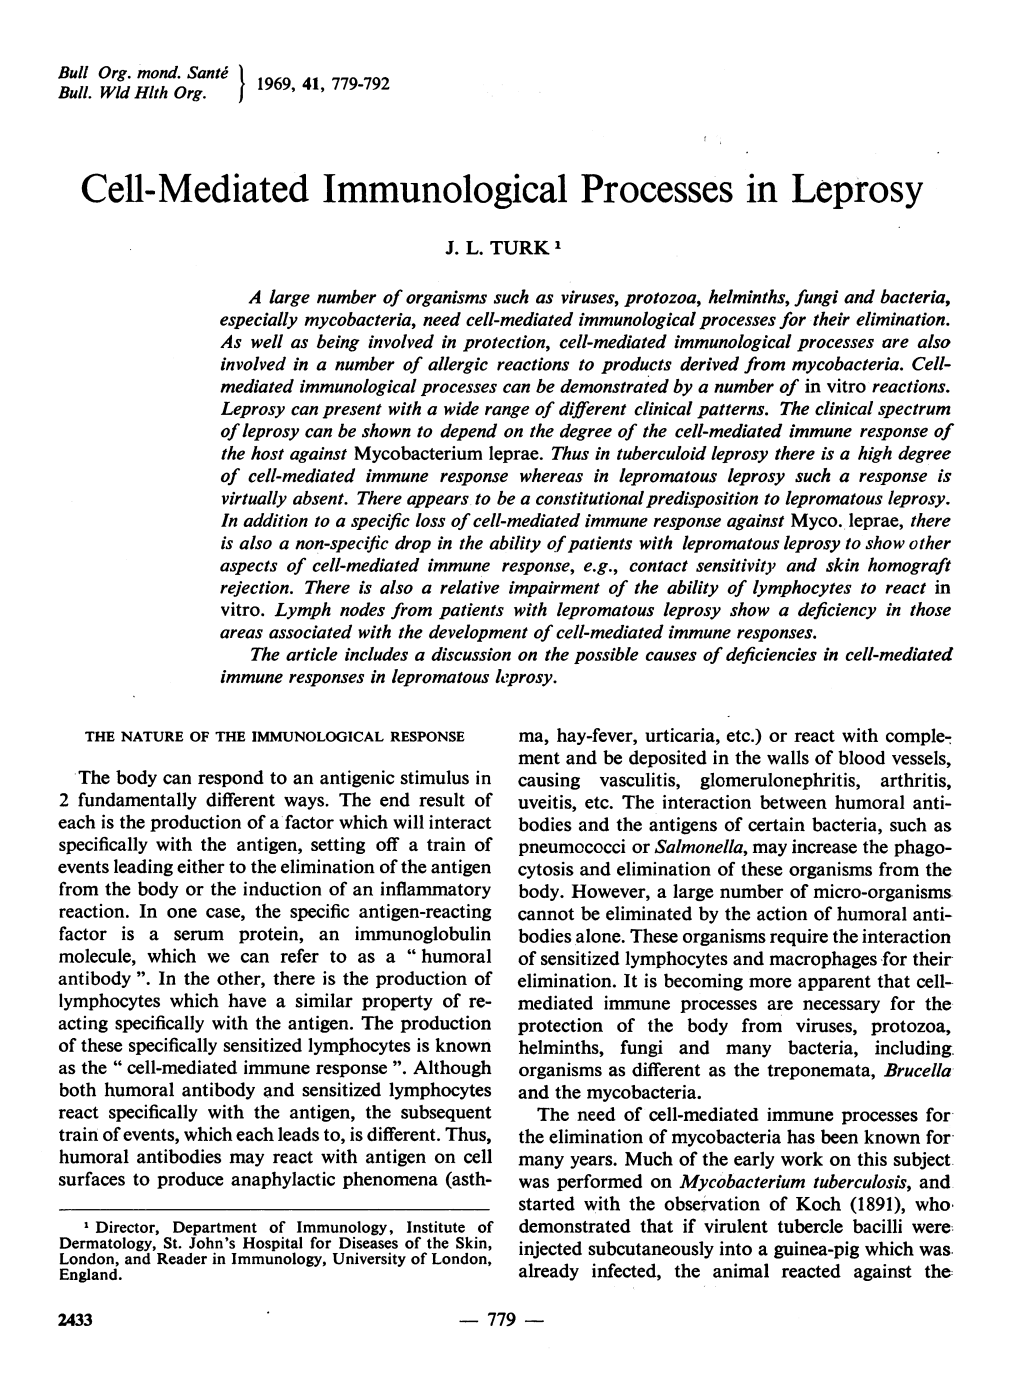 Cell-Mediated Immunologicalprocesses in Leprosy